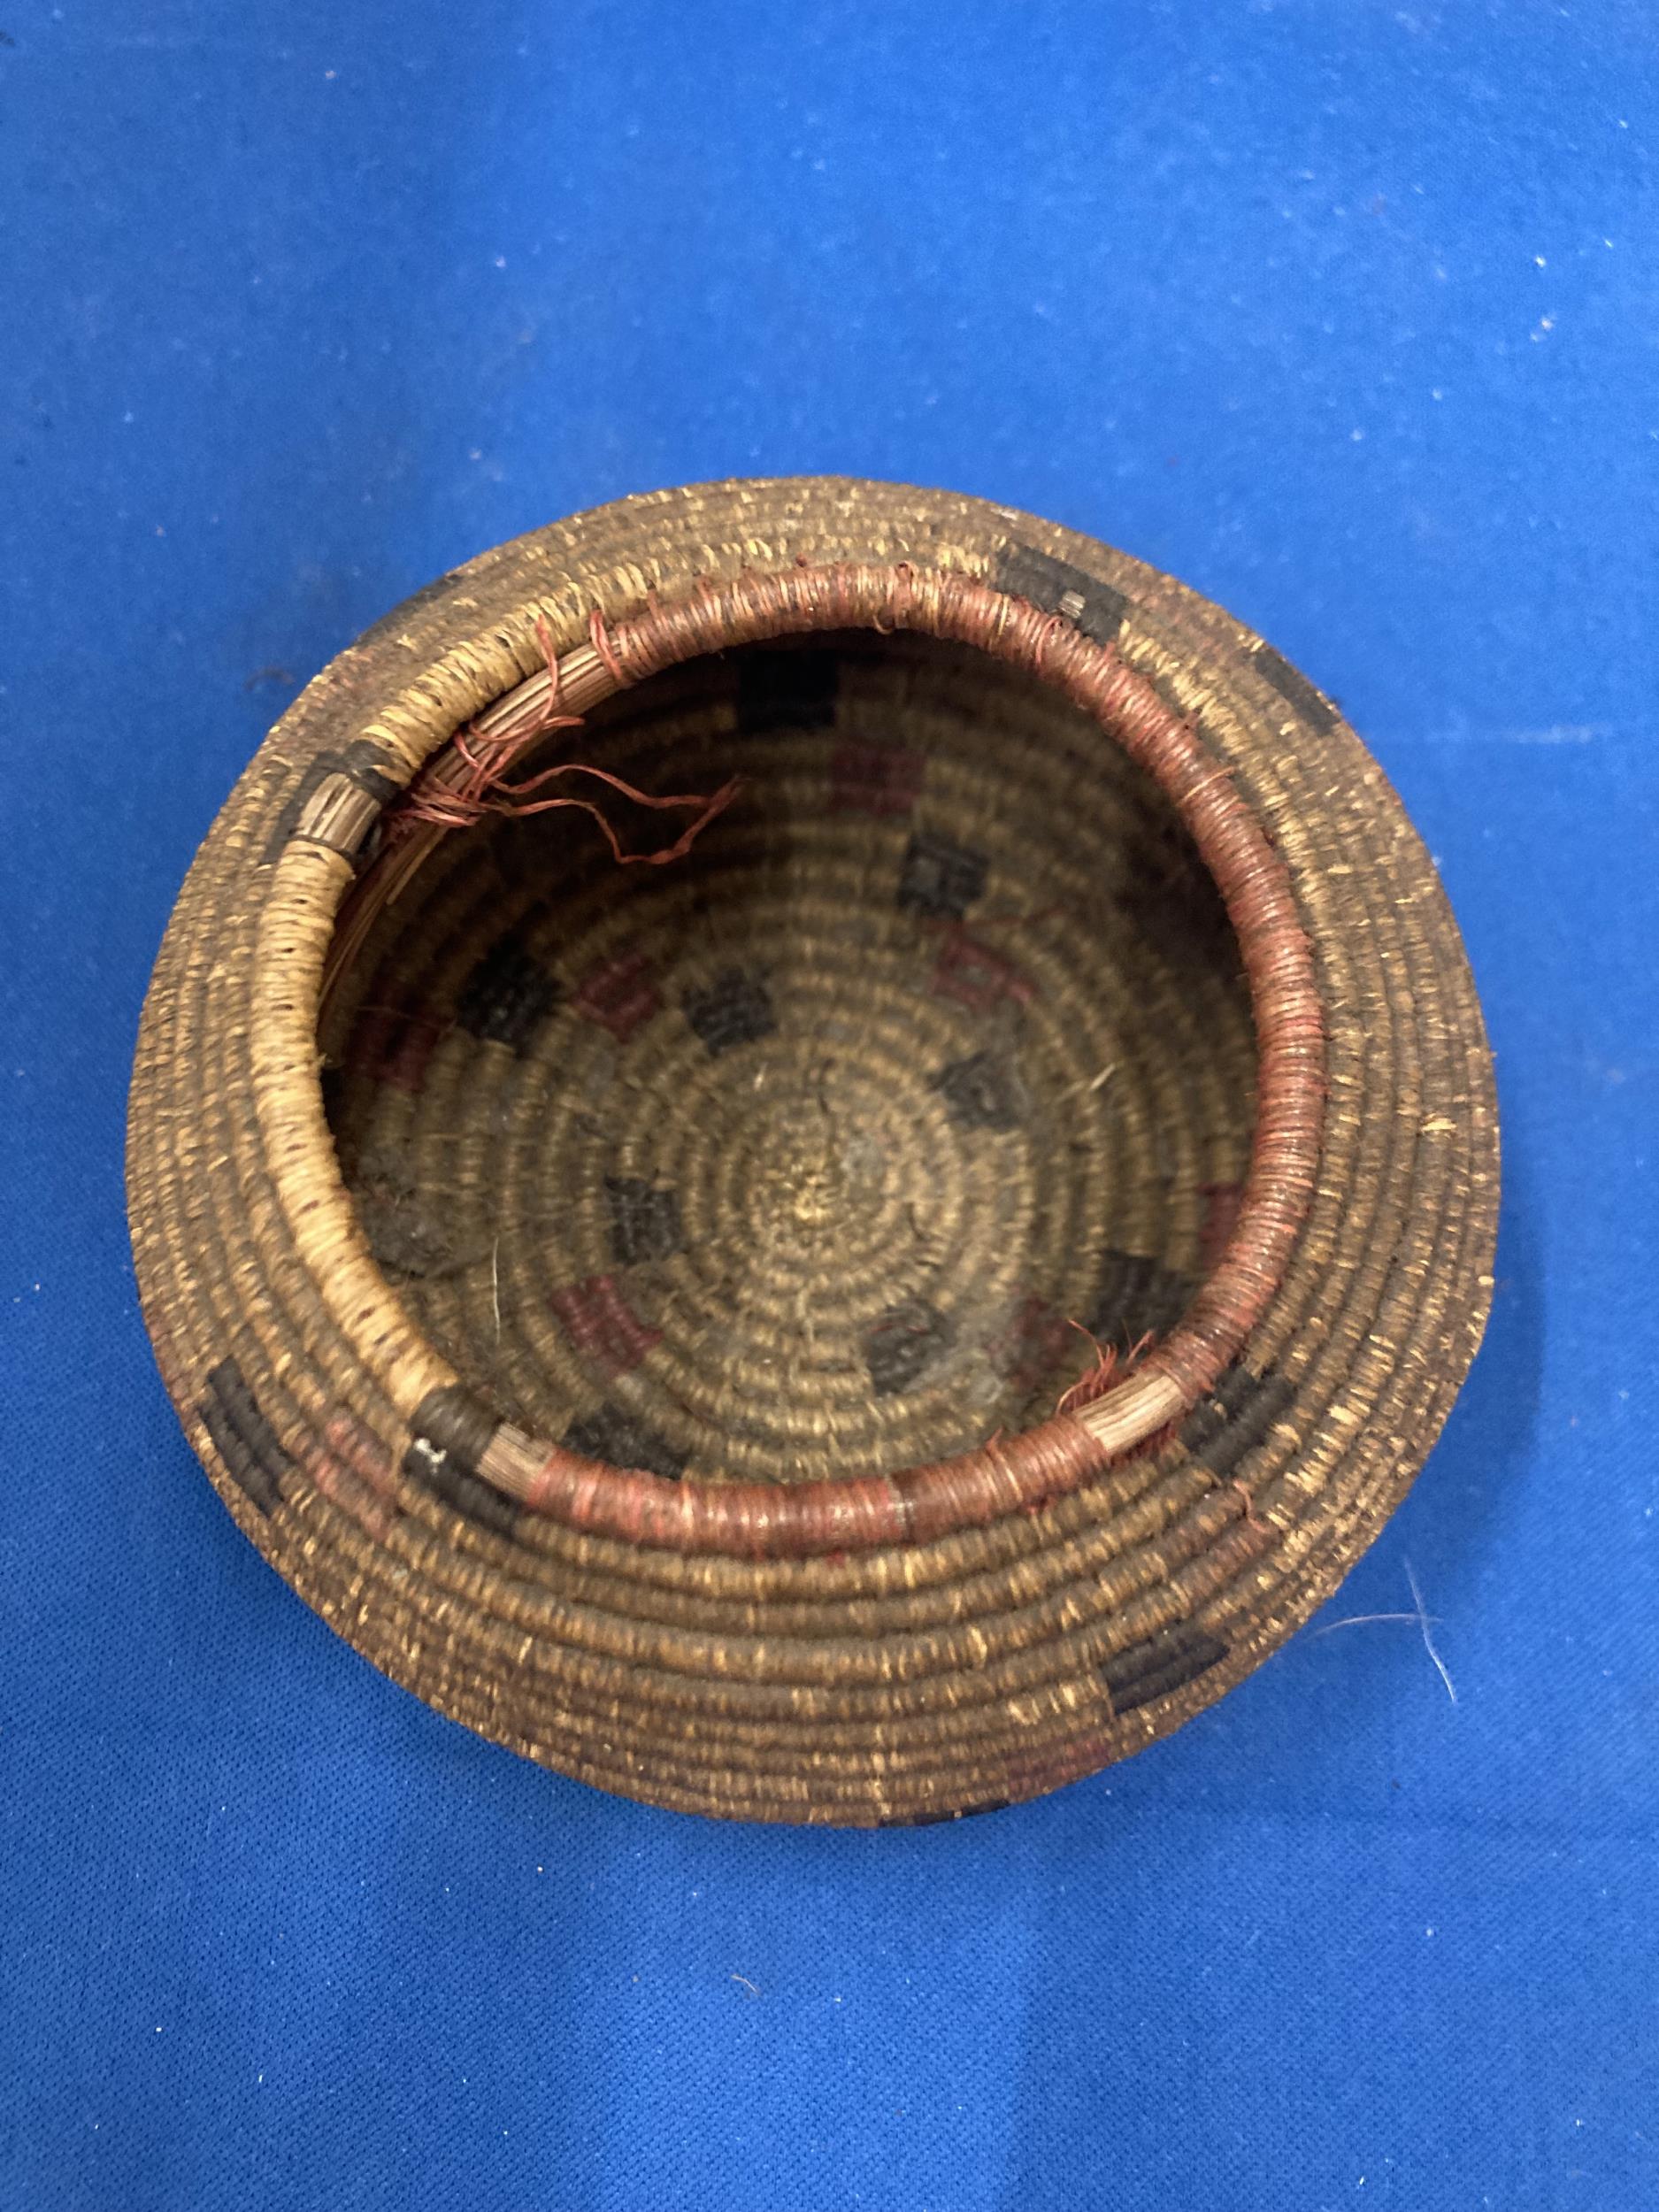 A LATE 19TH/EARLY 20TH CENTURY INDIAN BASKET HEIGHT 6CM - Image 2 of 3